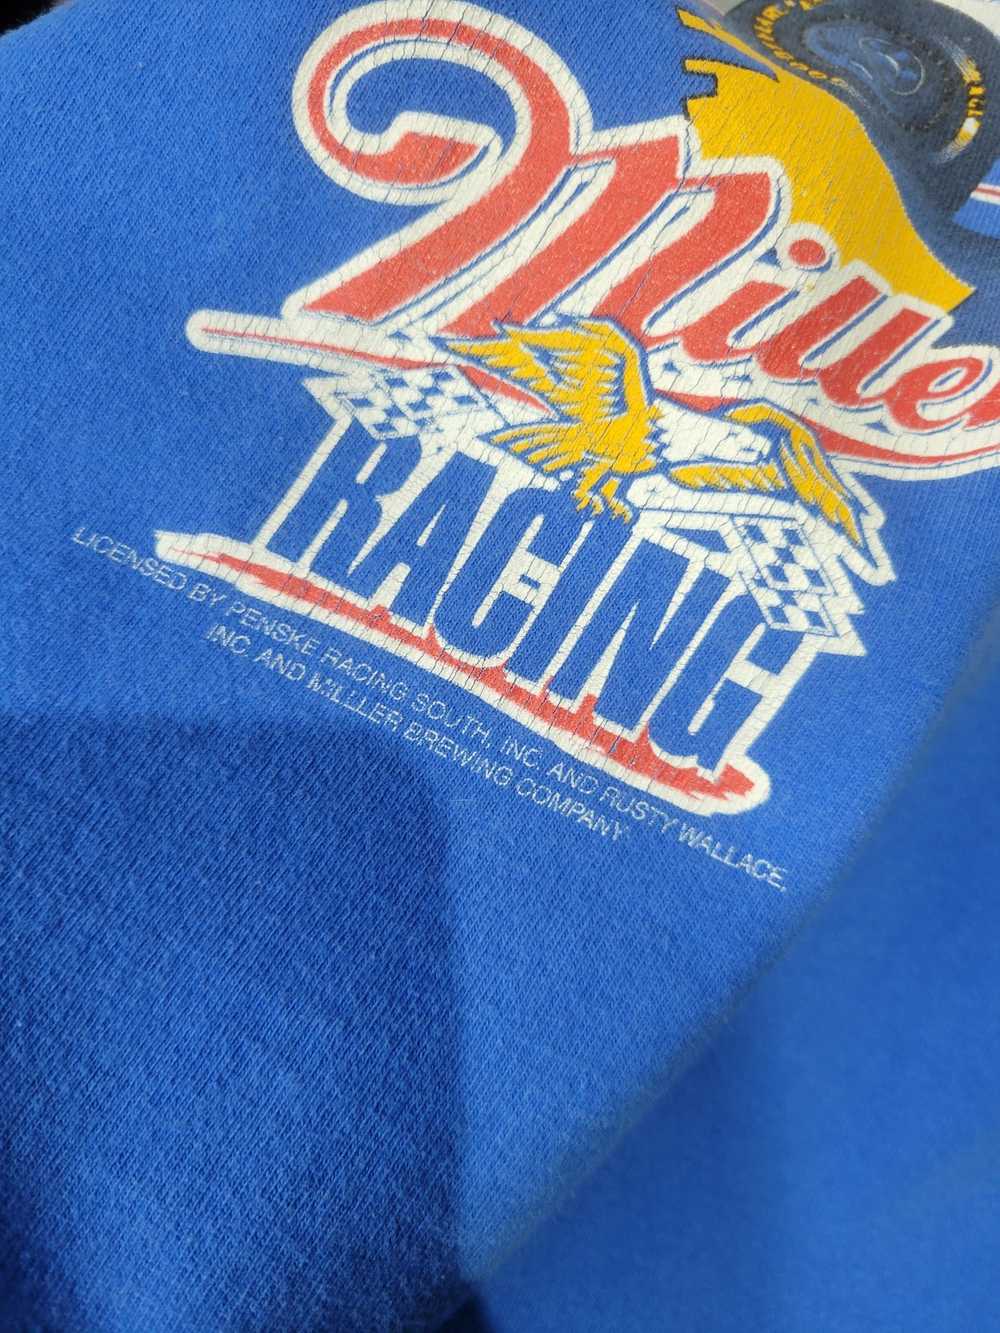 NASCAR 90s Rusty Wallace " Lite Enough To Fly" - image 7